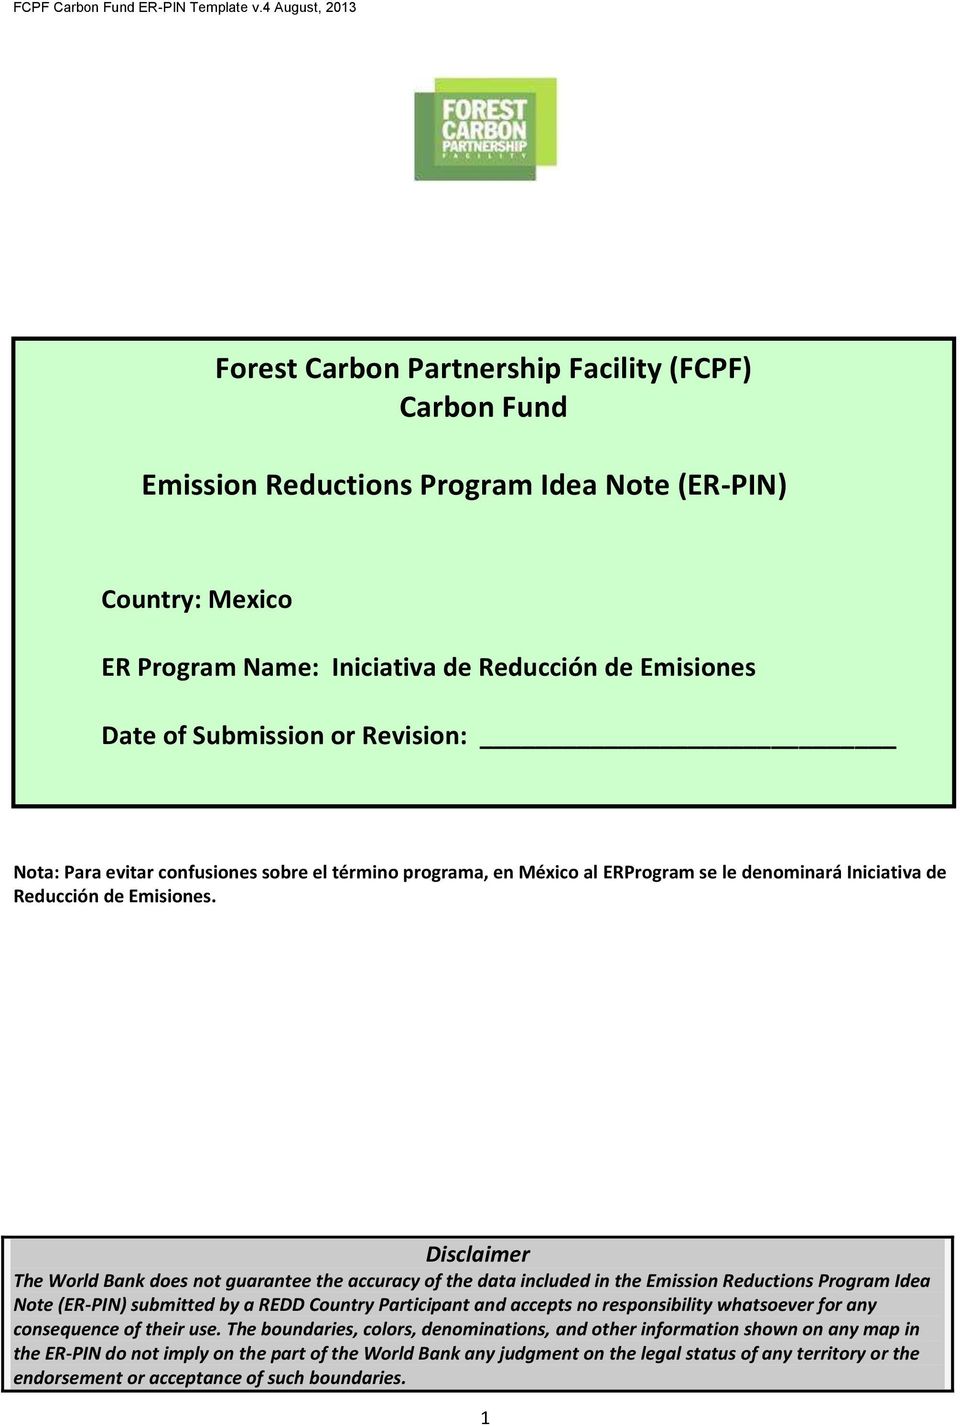 Disclaimer The World Bank does not guarantee the accuracy of the data included in the Emission Reductions Program Idea Note (ER-PIN) submitted by a REDD Country Participant and accepts no